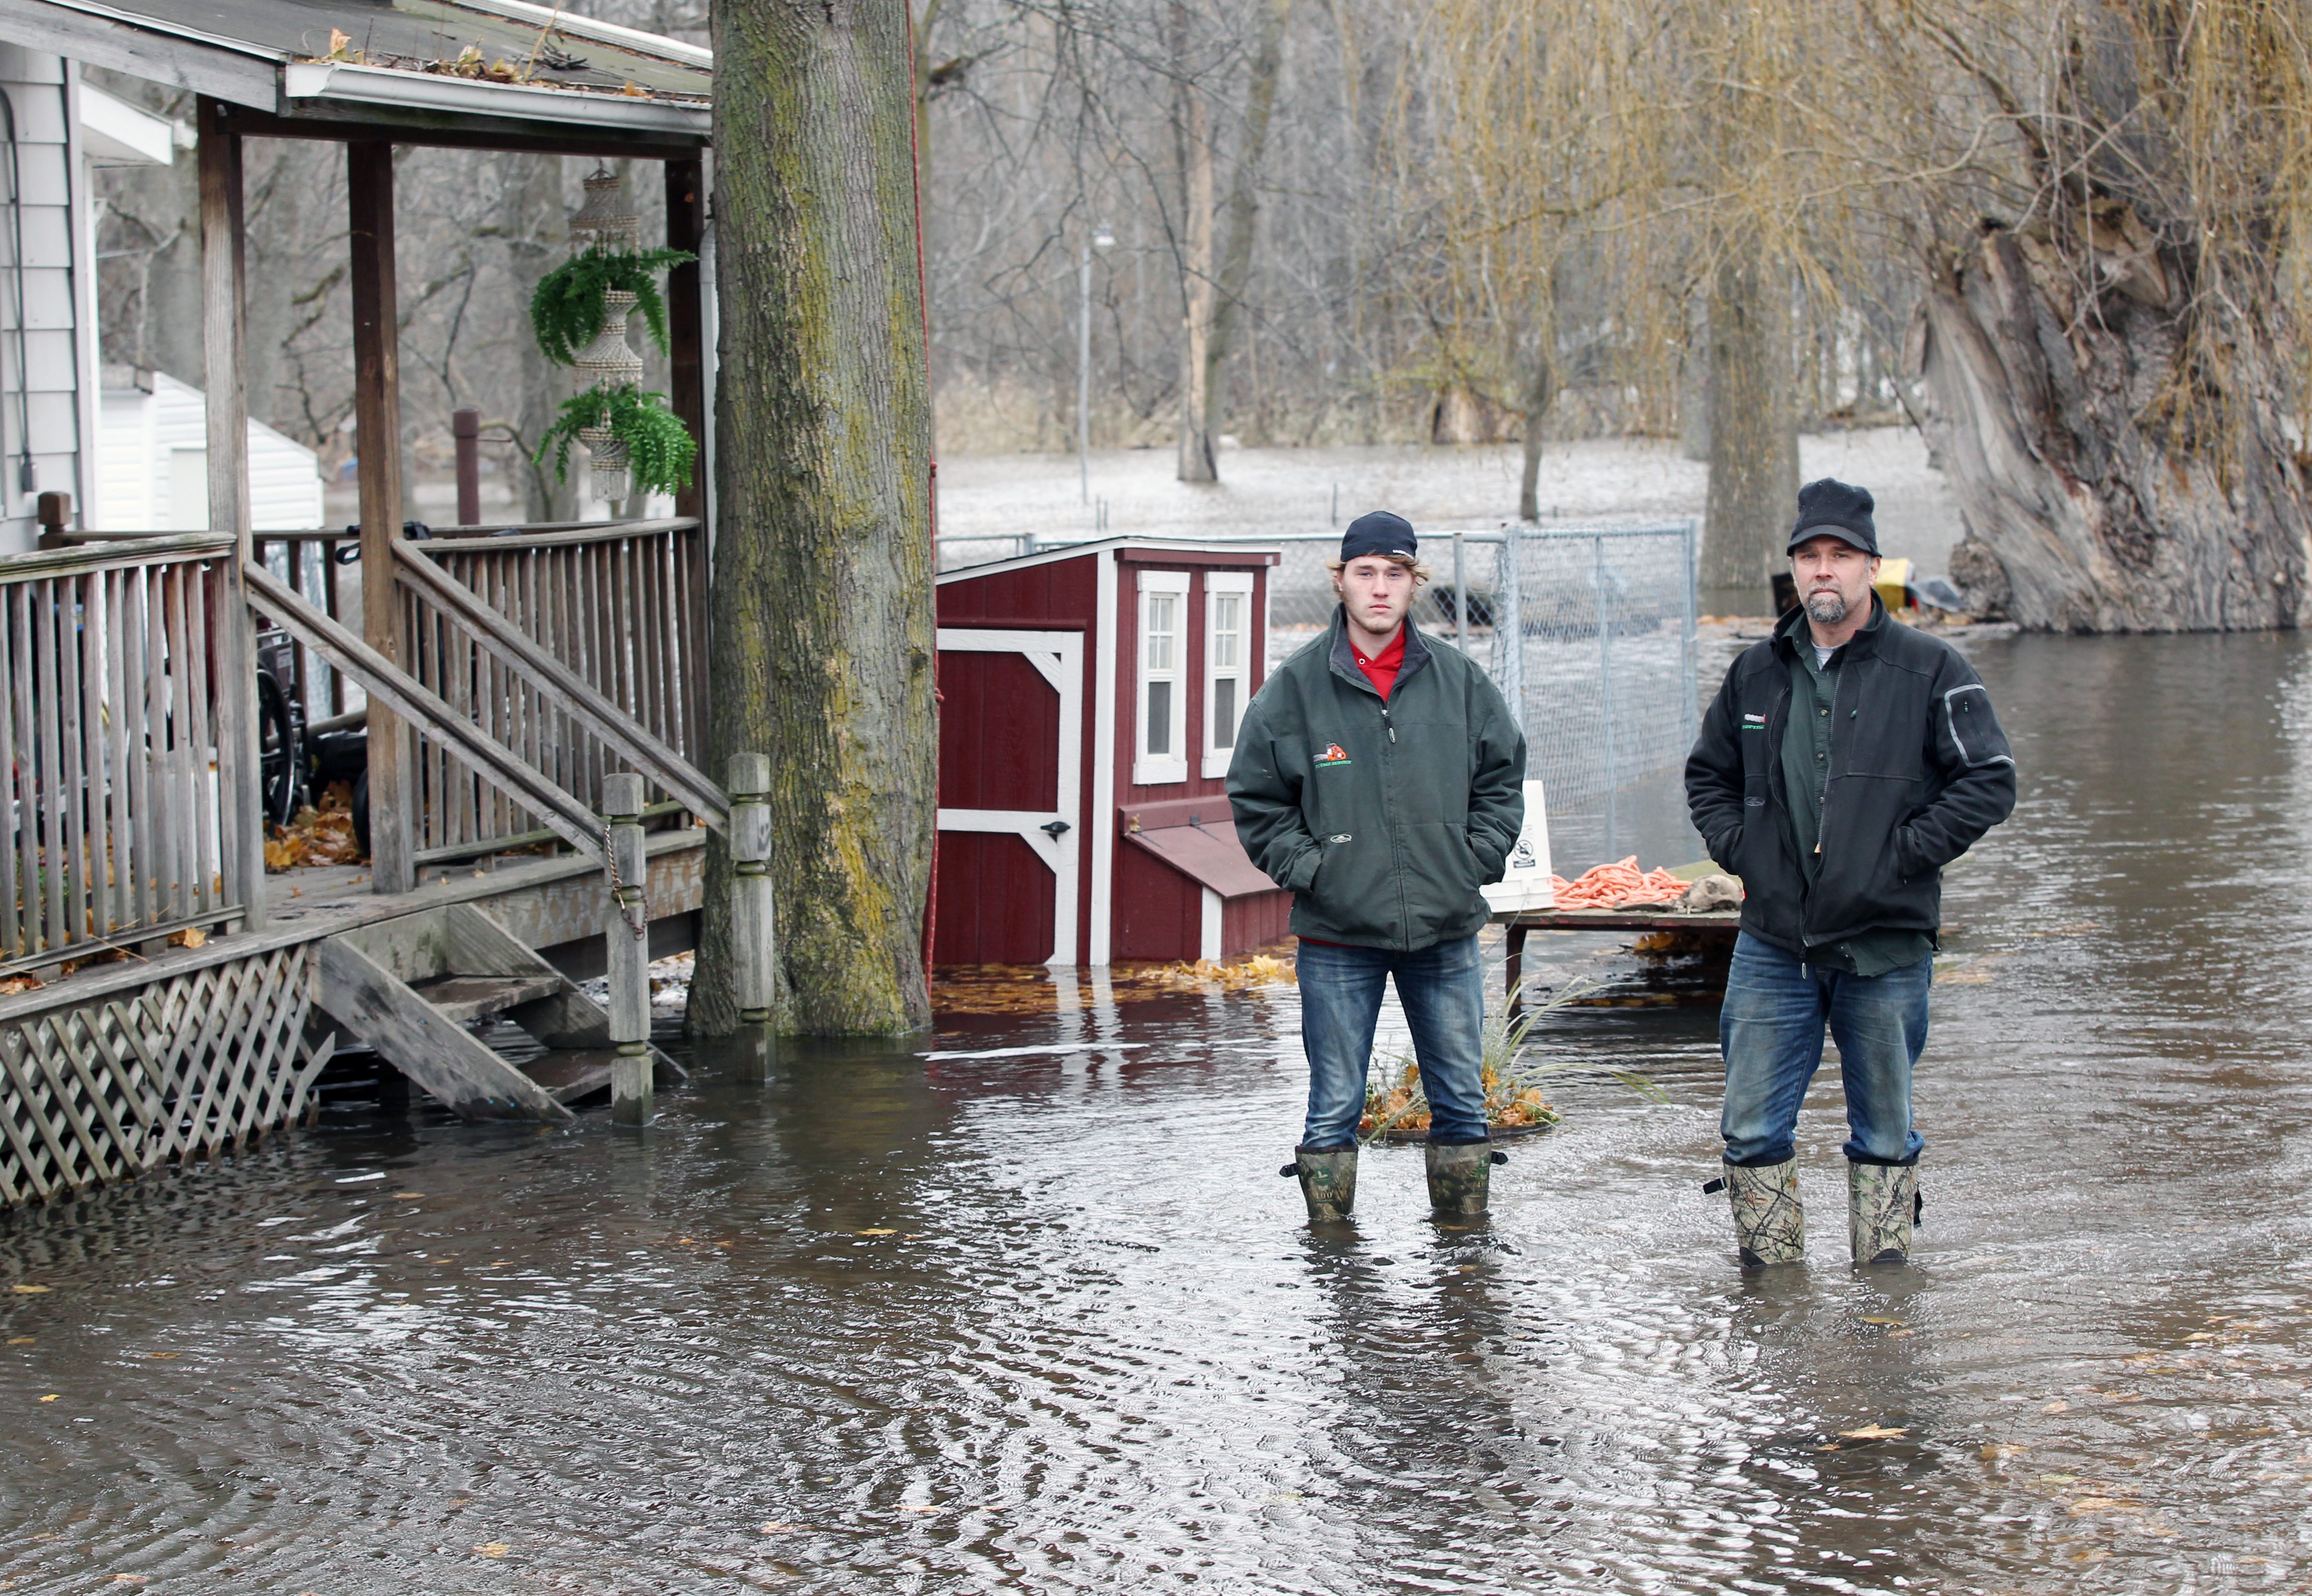 Jake Sojka, left, and his father Gregory Sojka, stand alongside their flooded home on Main Street in Bowmansville, N.Y., after Ellicott Creek crested its banks Tuesday, Nov. 25, 2014. 